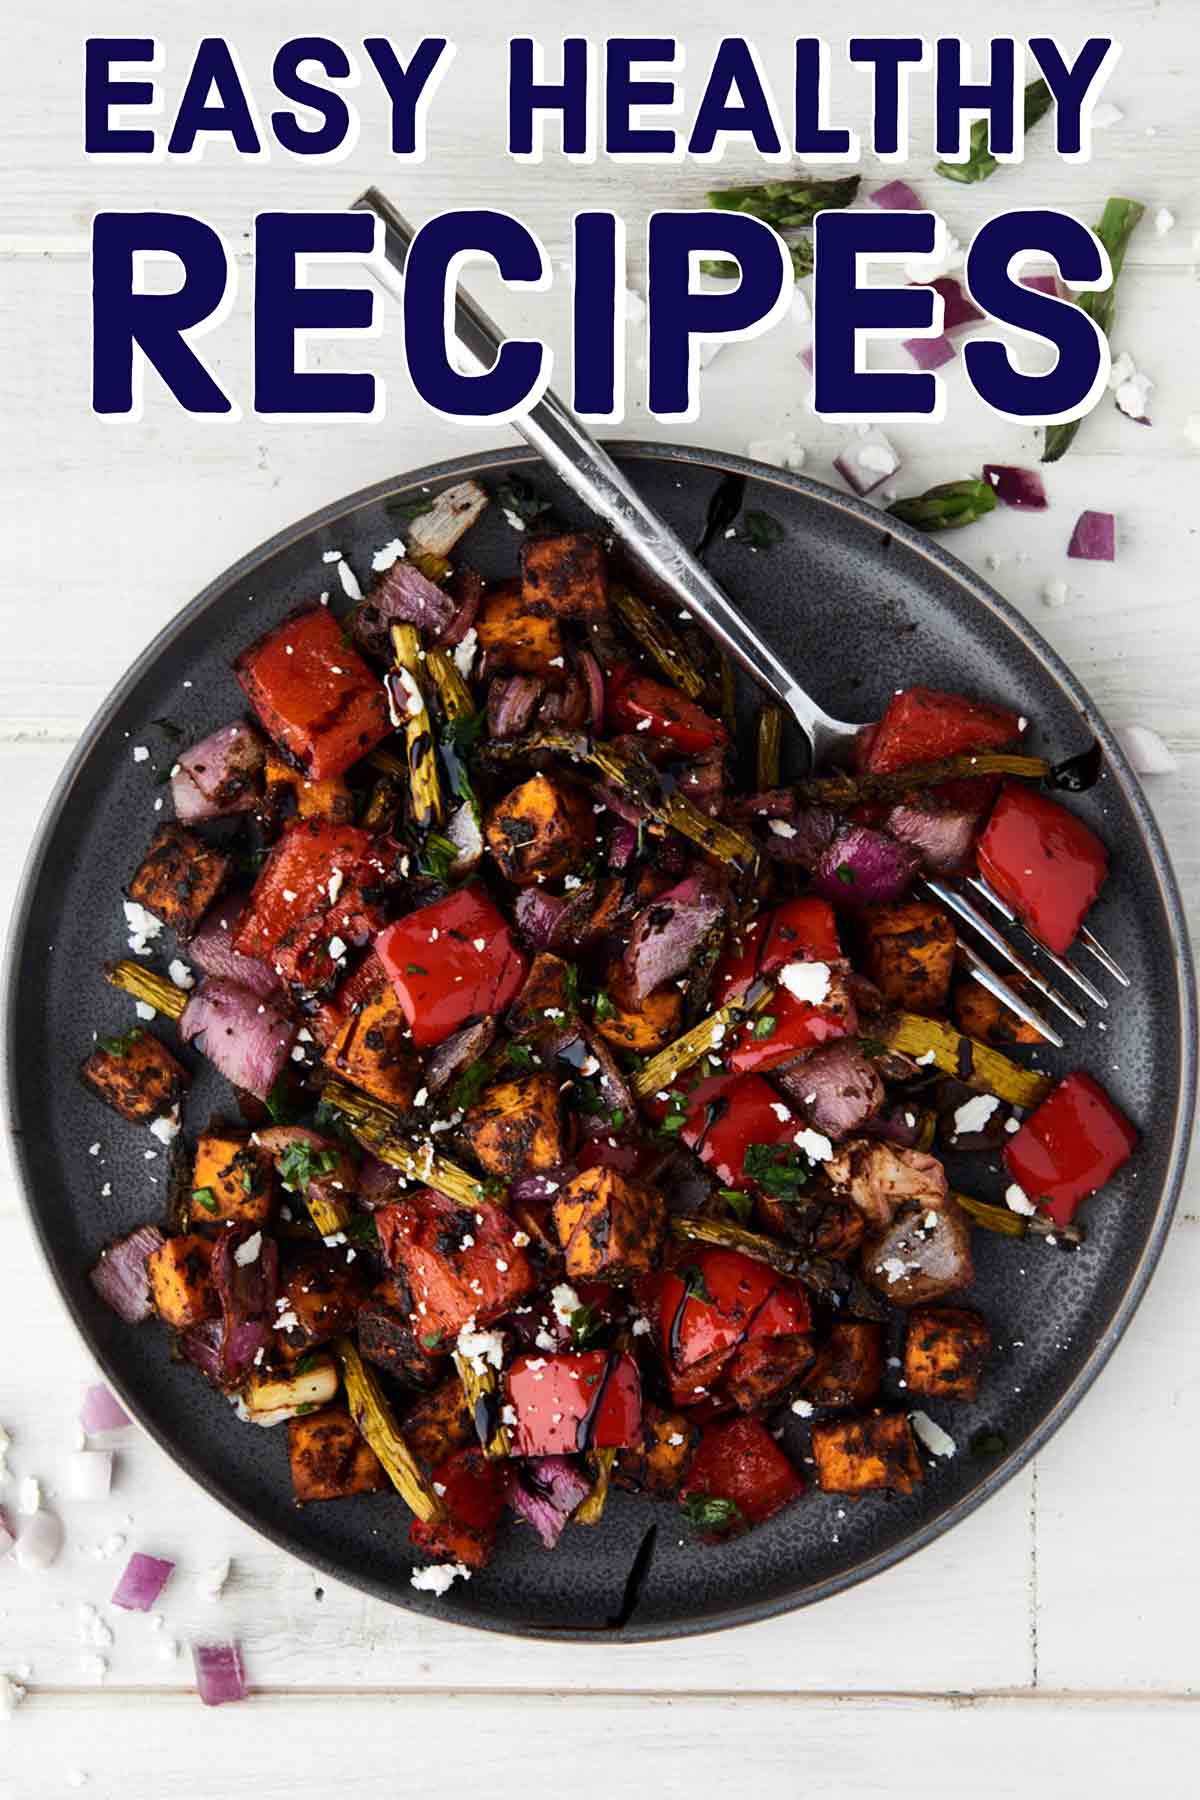 Easy Healthy Recipes 2019. Recipes for breakfast, lunch, snacks, sides, dinner, and even dessert! All quick, easy, meal prep friendly, can be made in advance, and of course, delicious! showmetheyummy.com #healthy #recipes